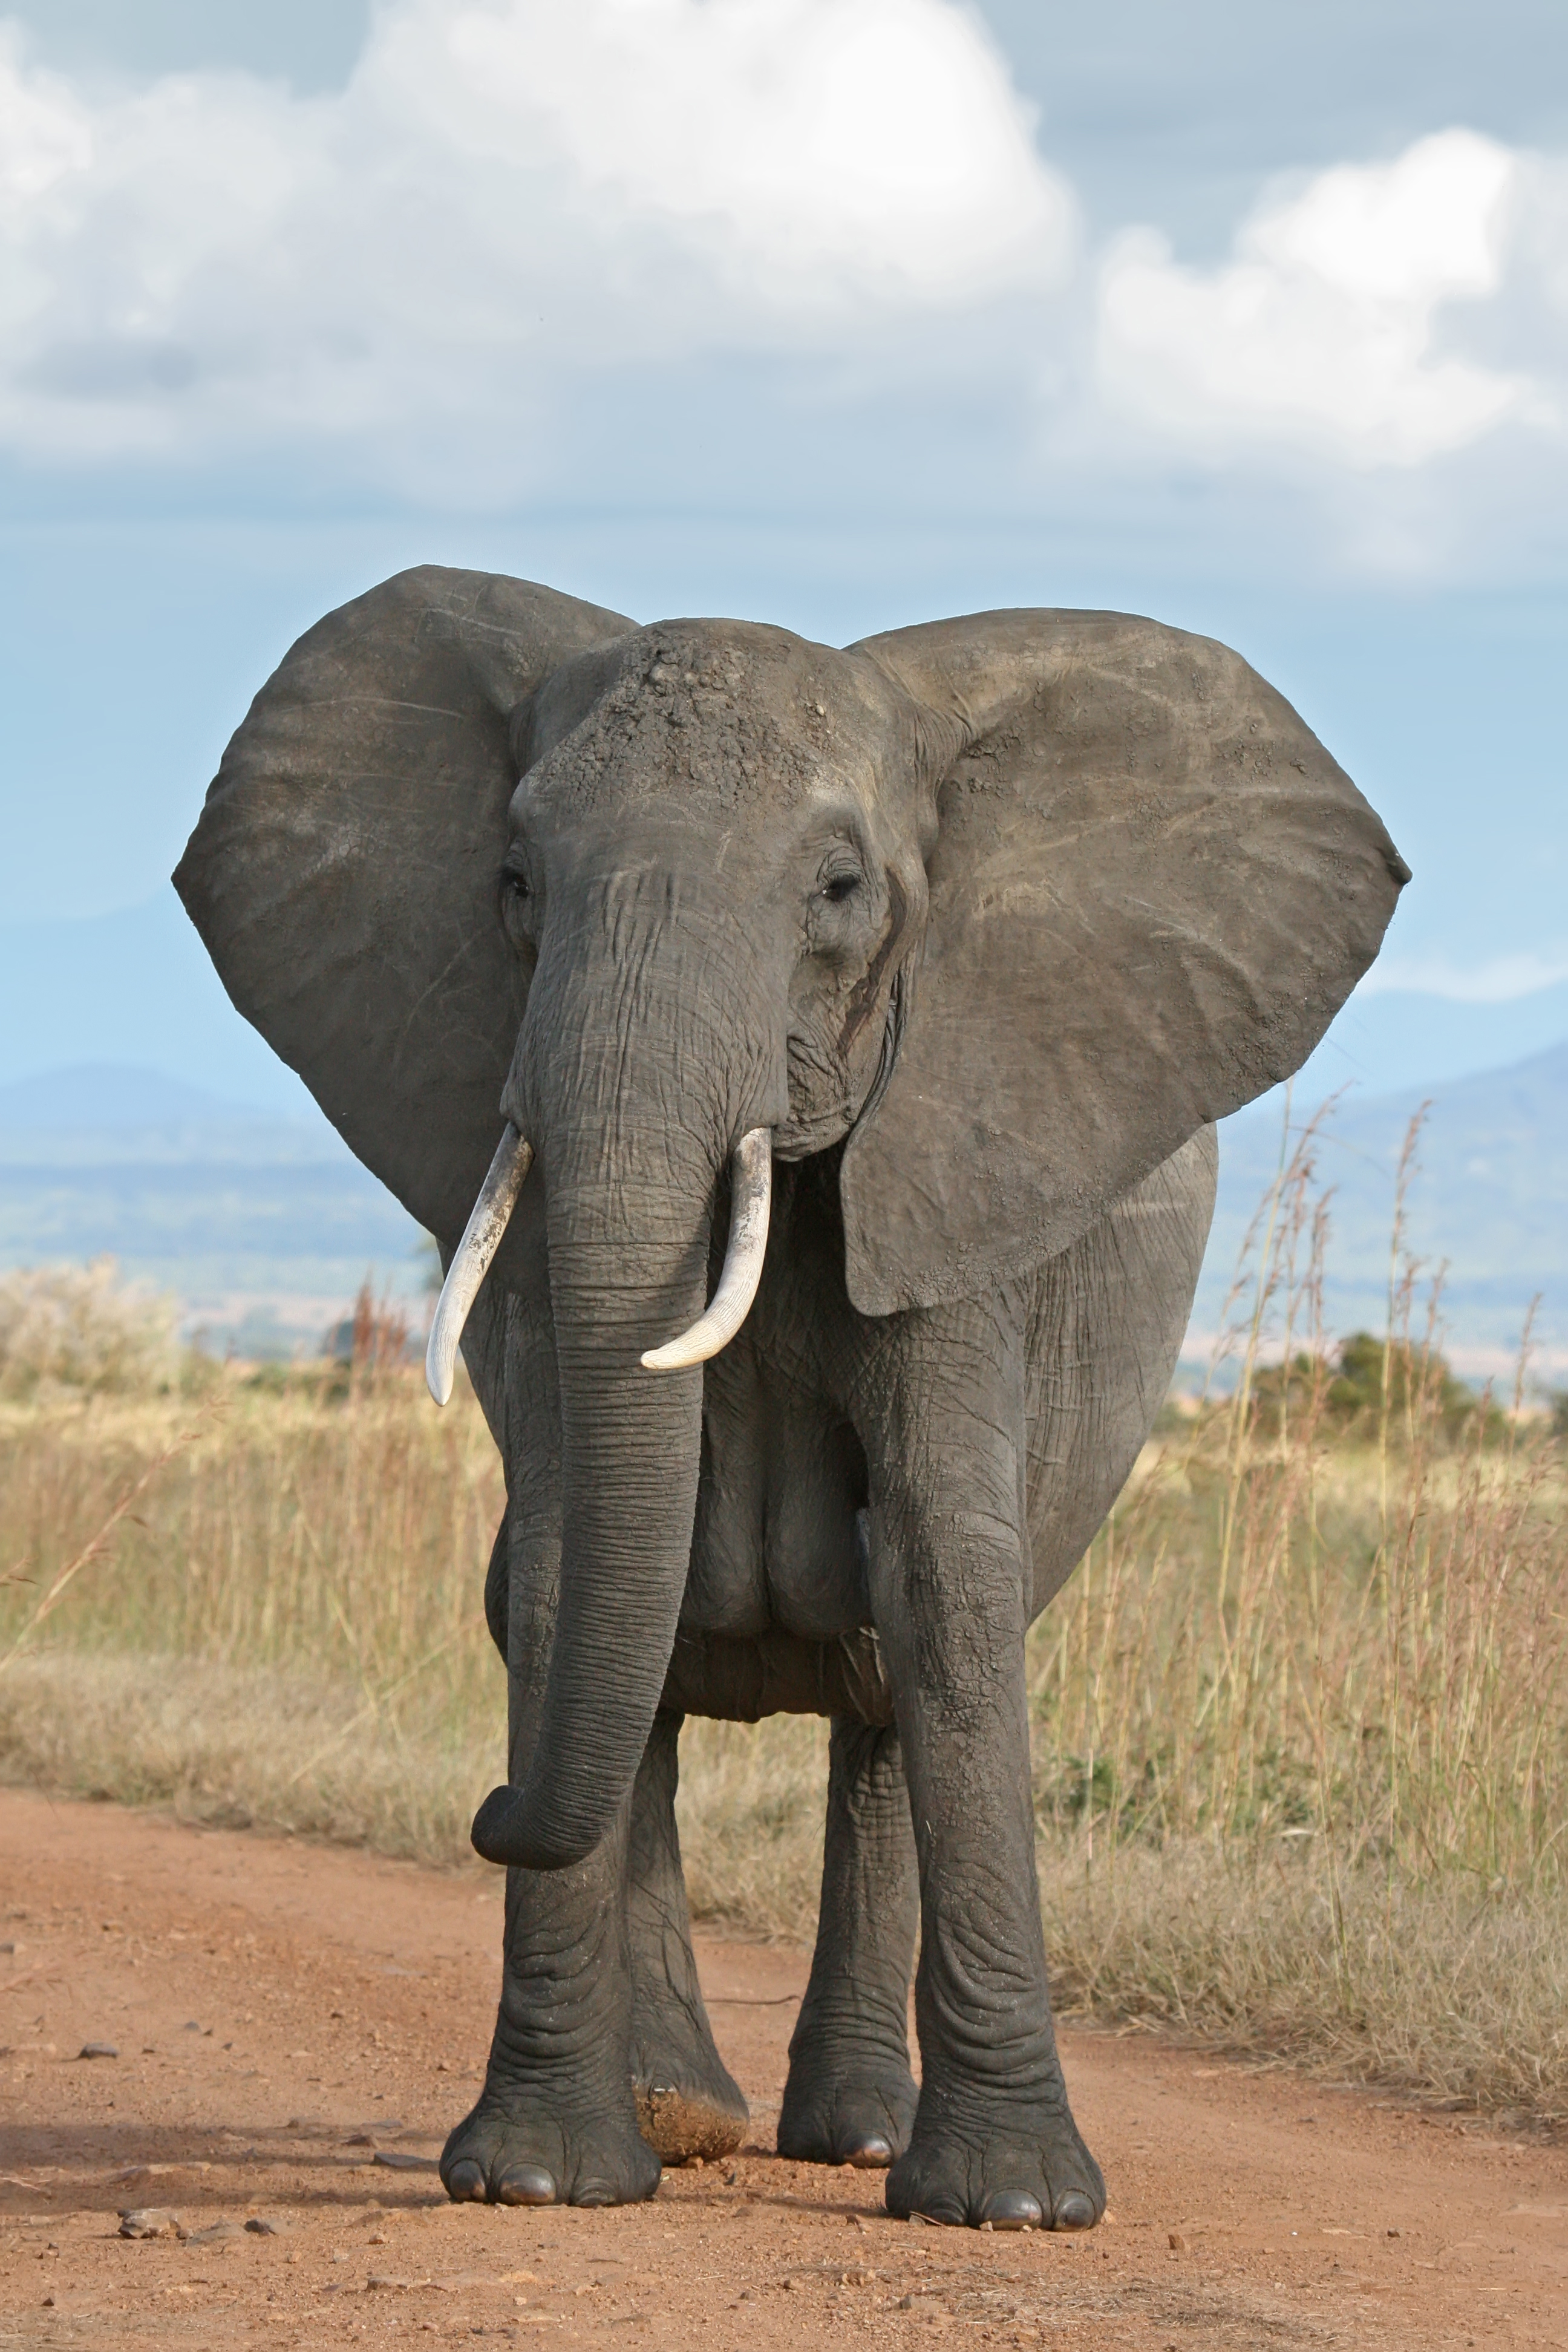 What are elephants called?